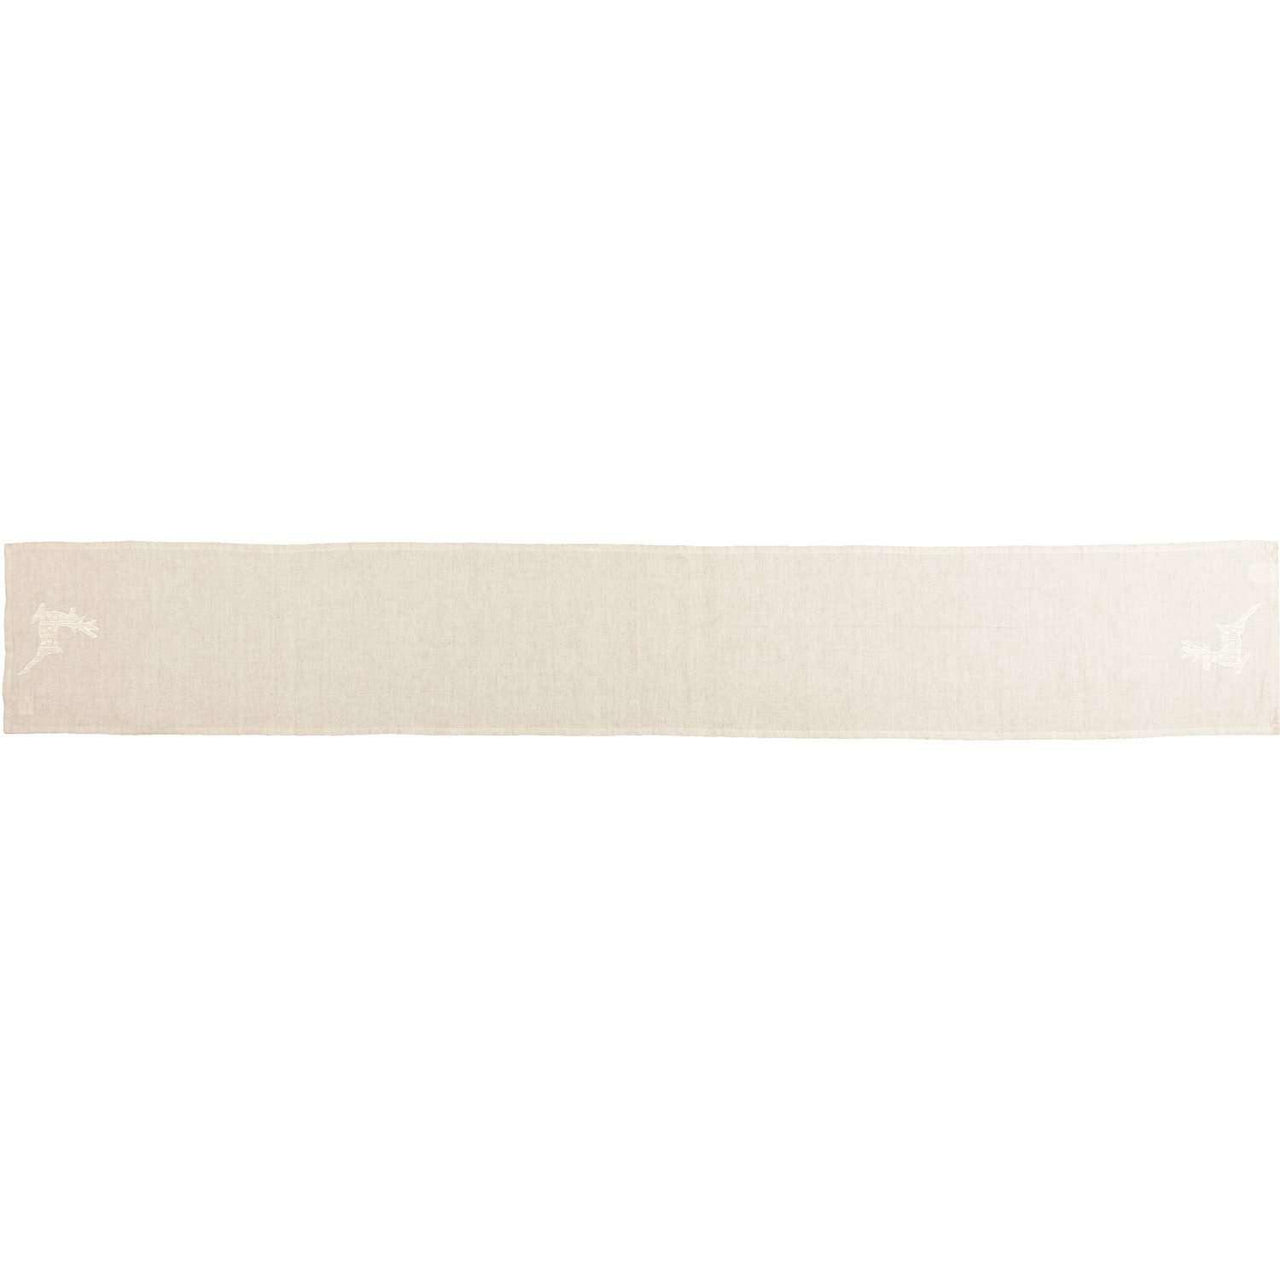 Creme Lace Deer Runner 13x90 VHC Brands - The Fox Decor